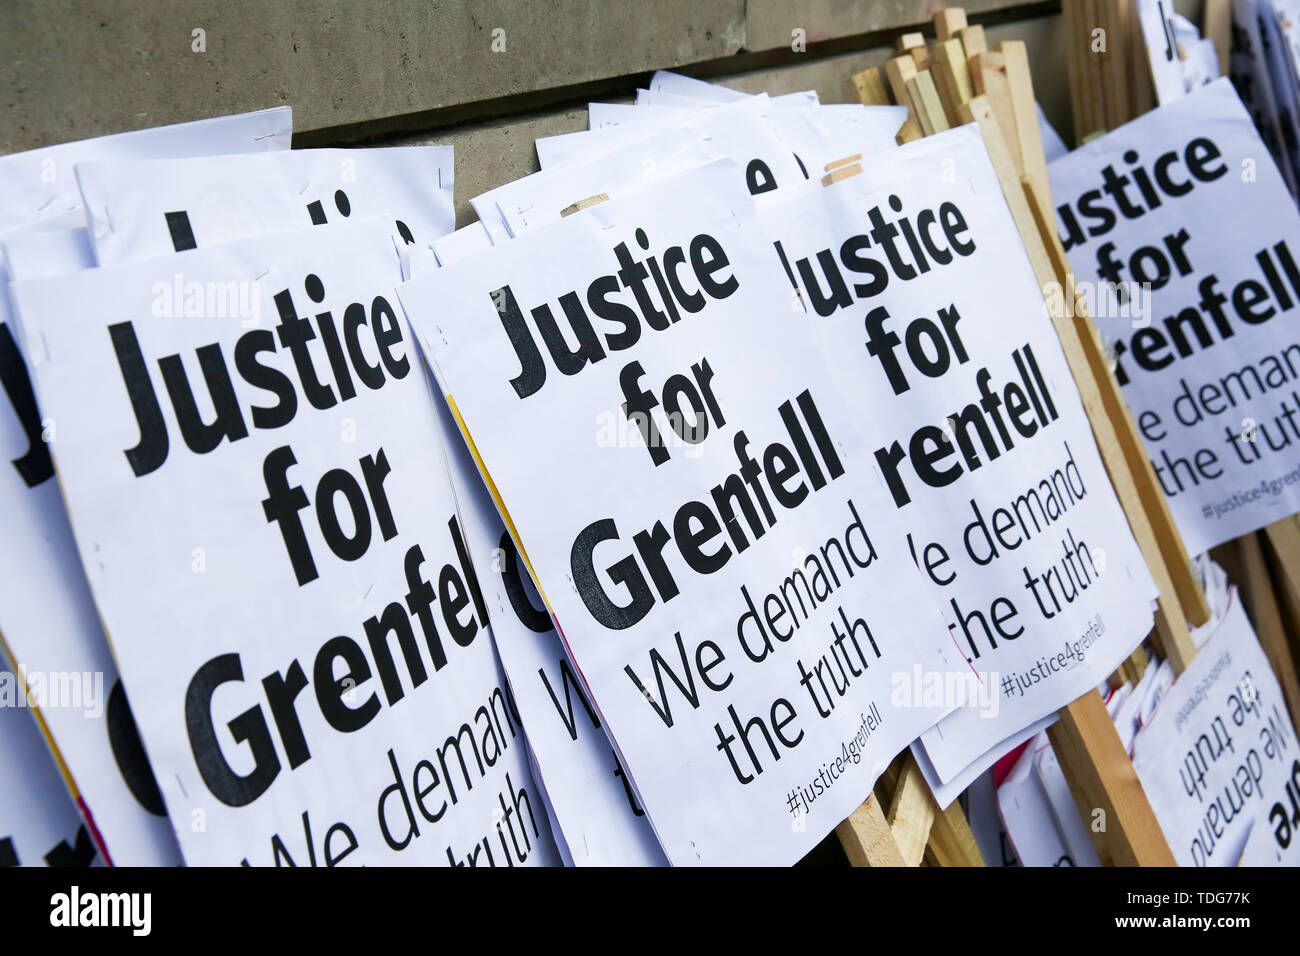 Justice for Grenfell placards seen during the Justice for Grenfell Solidarity rally against the lack of action by the Government following the Grenfell Tower fire, in rehousing affected families, delays in the Public Inquiry, tower blocks still covered in flammable cladding, soil contamination and the performance of Royal Borough of Kensington and Chelsea. On 14 June 2017, just before 1:00 am a fire broke out in the kitchen of the fourth floor flat at the 24-storey residential tower block in North Kensington, West London, which took the lives of 72 people. More than 70 others were injured and  Stock Photo